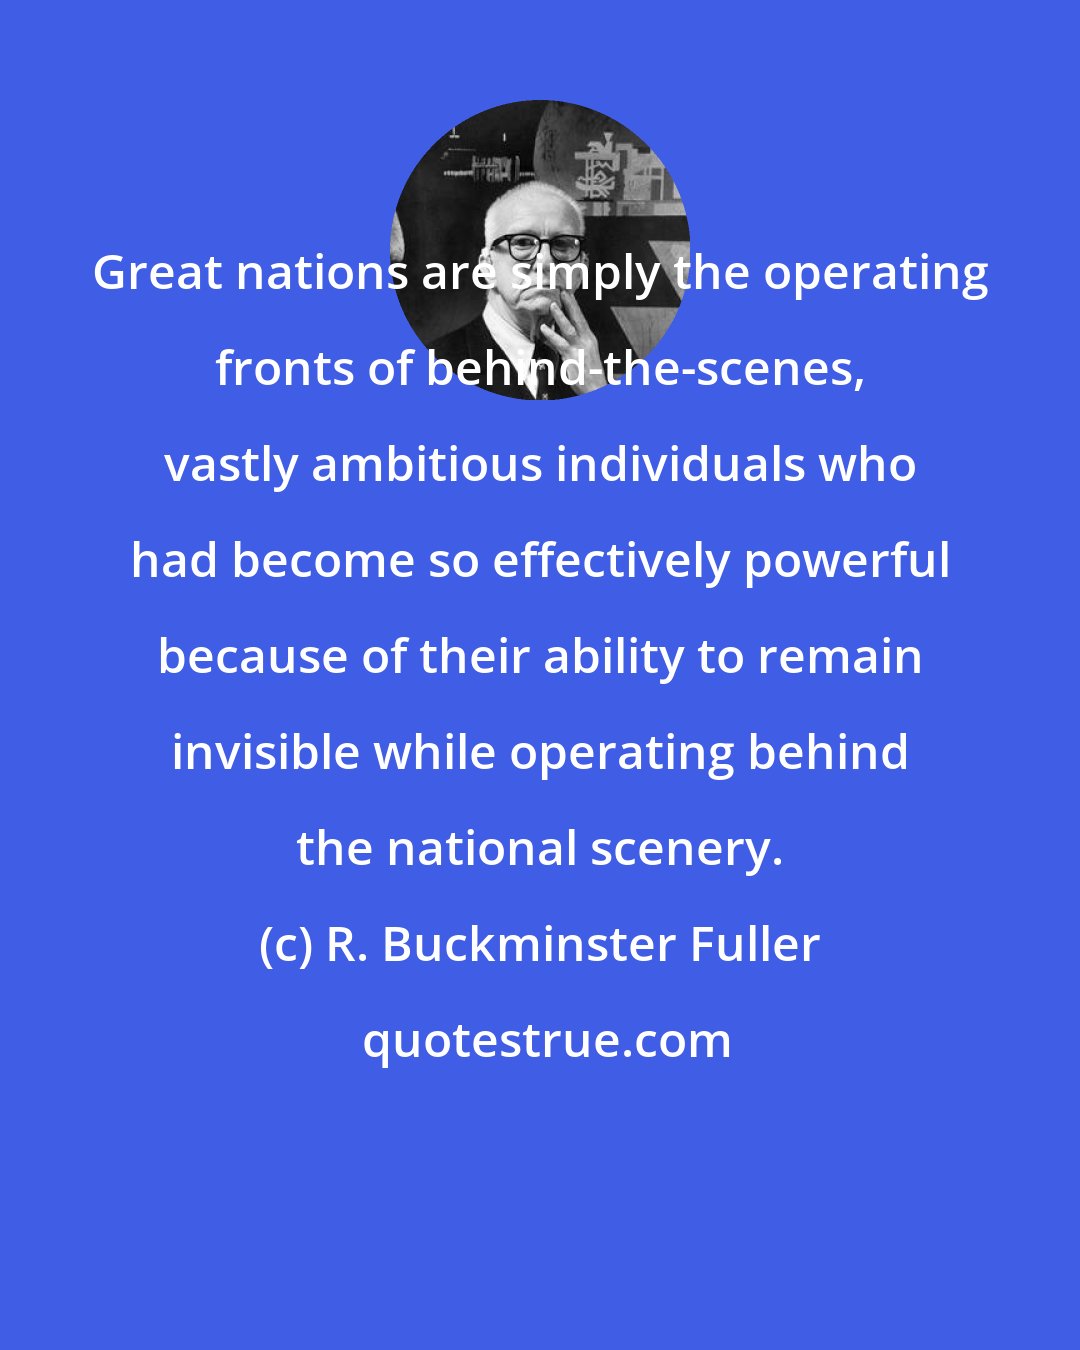 R. Buckminster Fuller: Great nations are simply the operating fronts of behind-the-scenes, vastly ambitious individuals who had become so effectively powerful because of their ability to remain invisible while operating behind the national scenery.